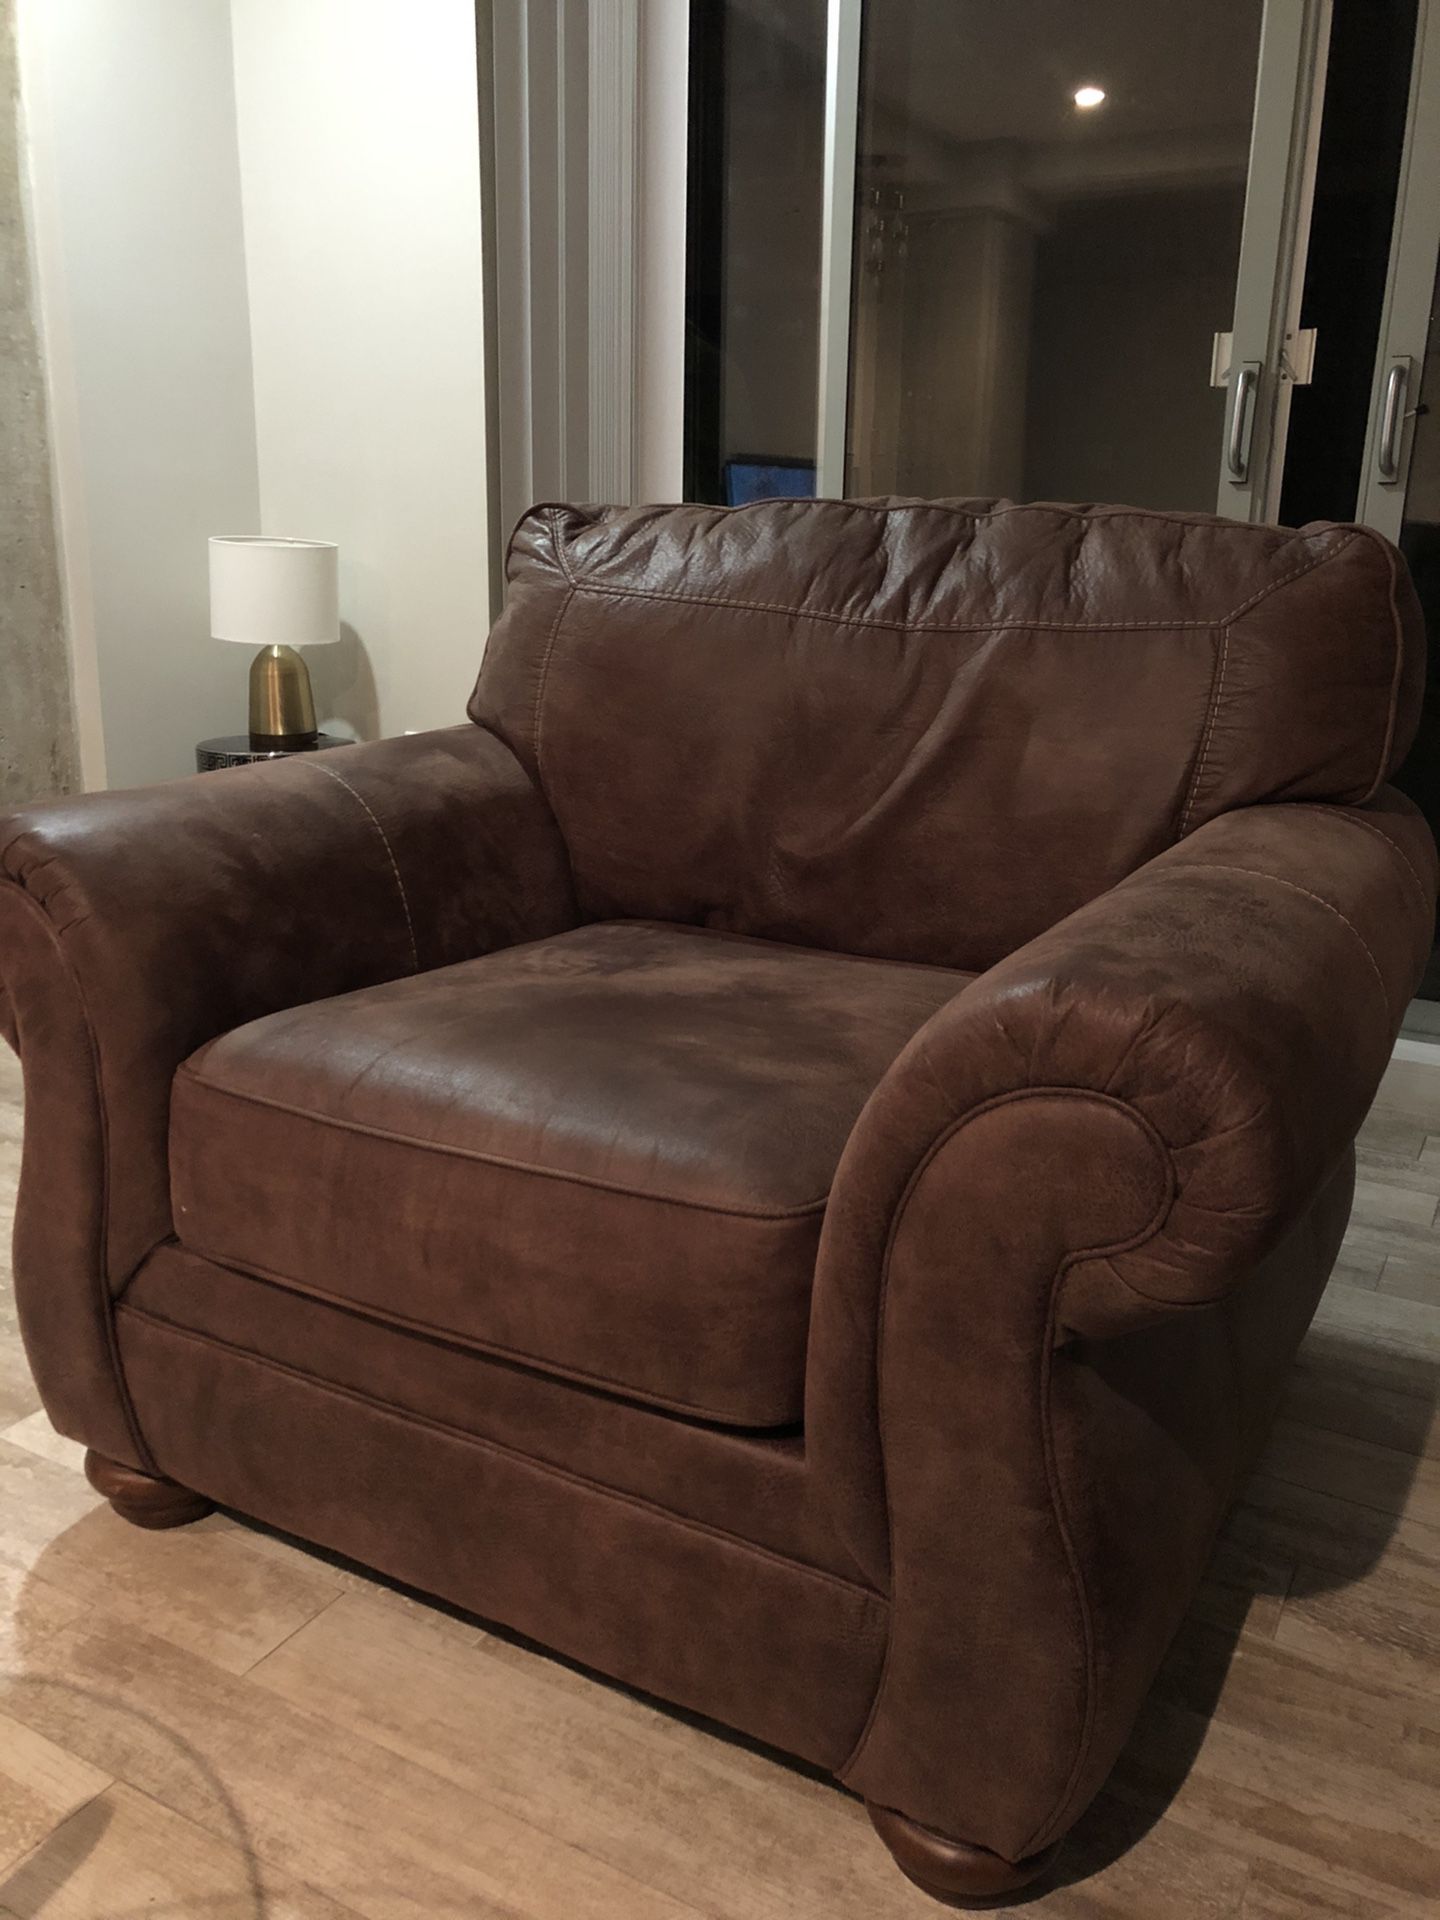 Comfortable leather couch and ottoman in good condition